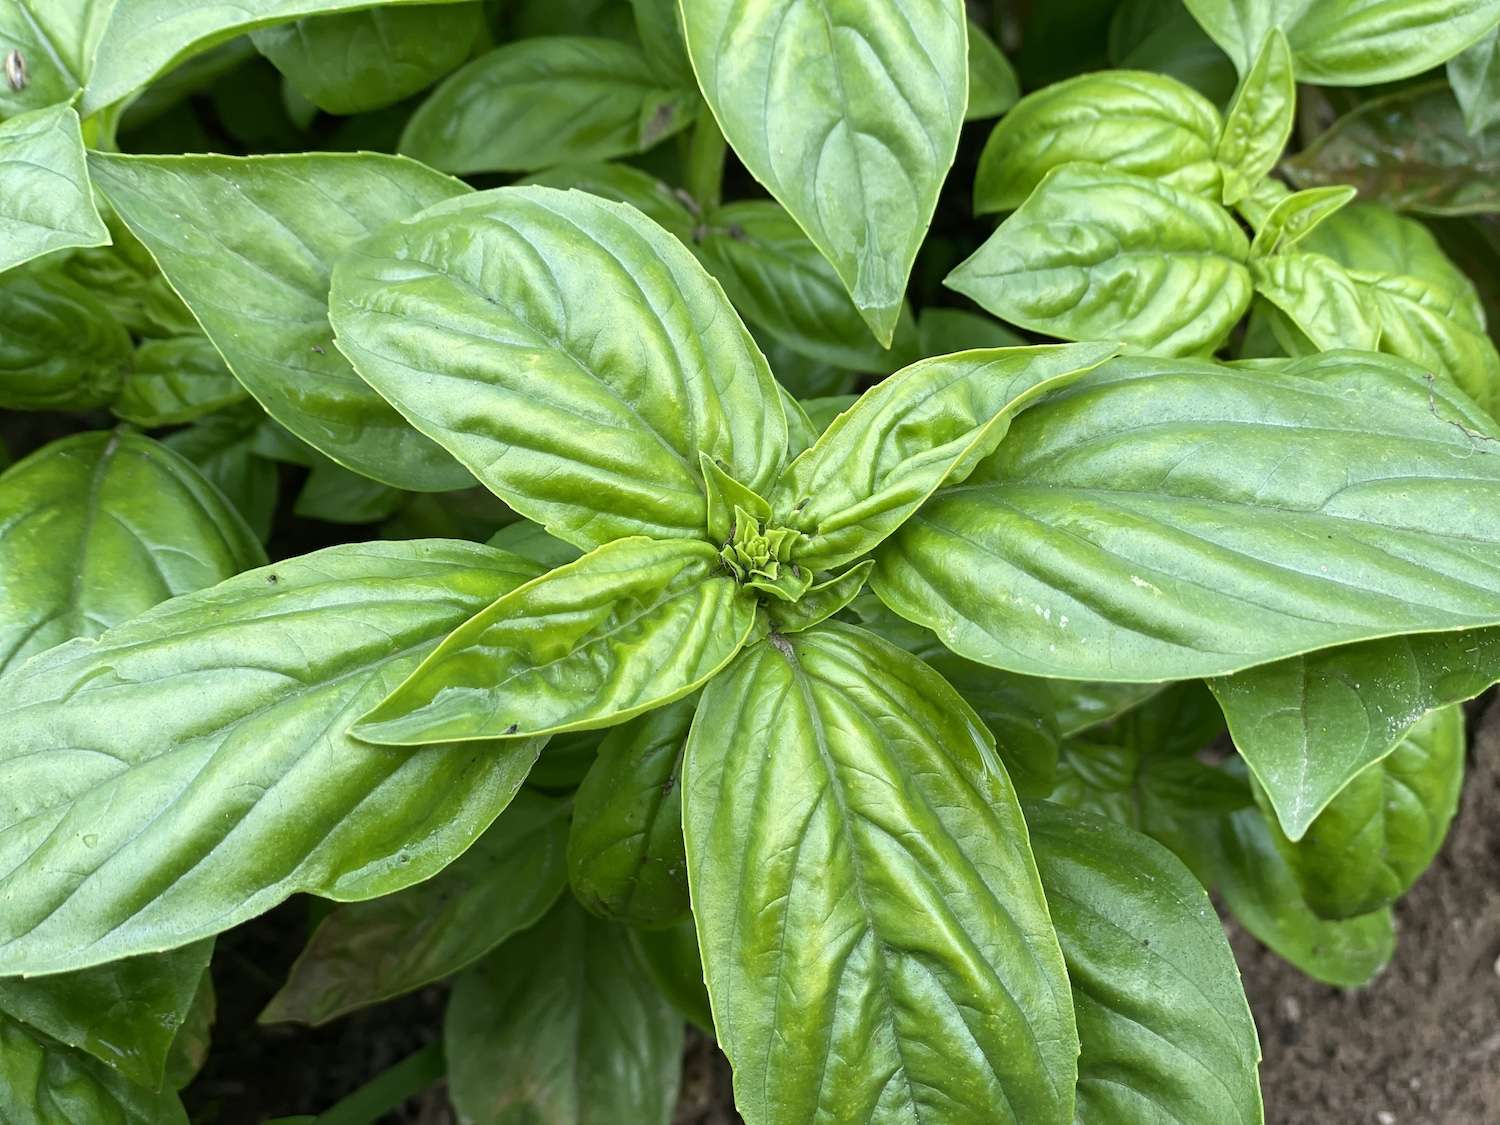 A close up photo of a basil plant just starting to flower